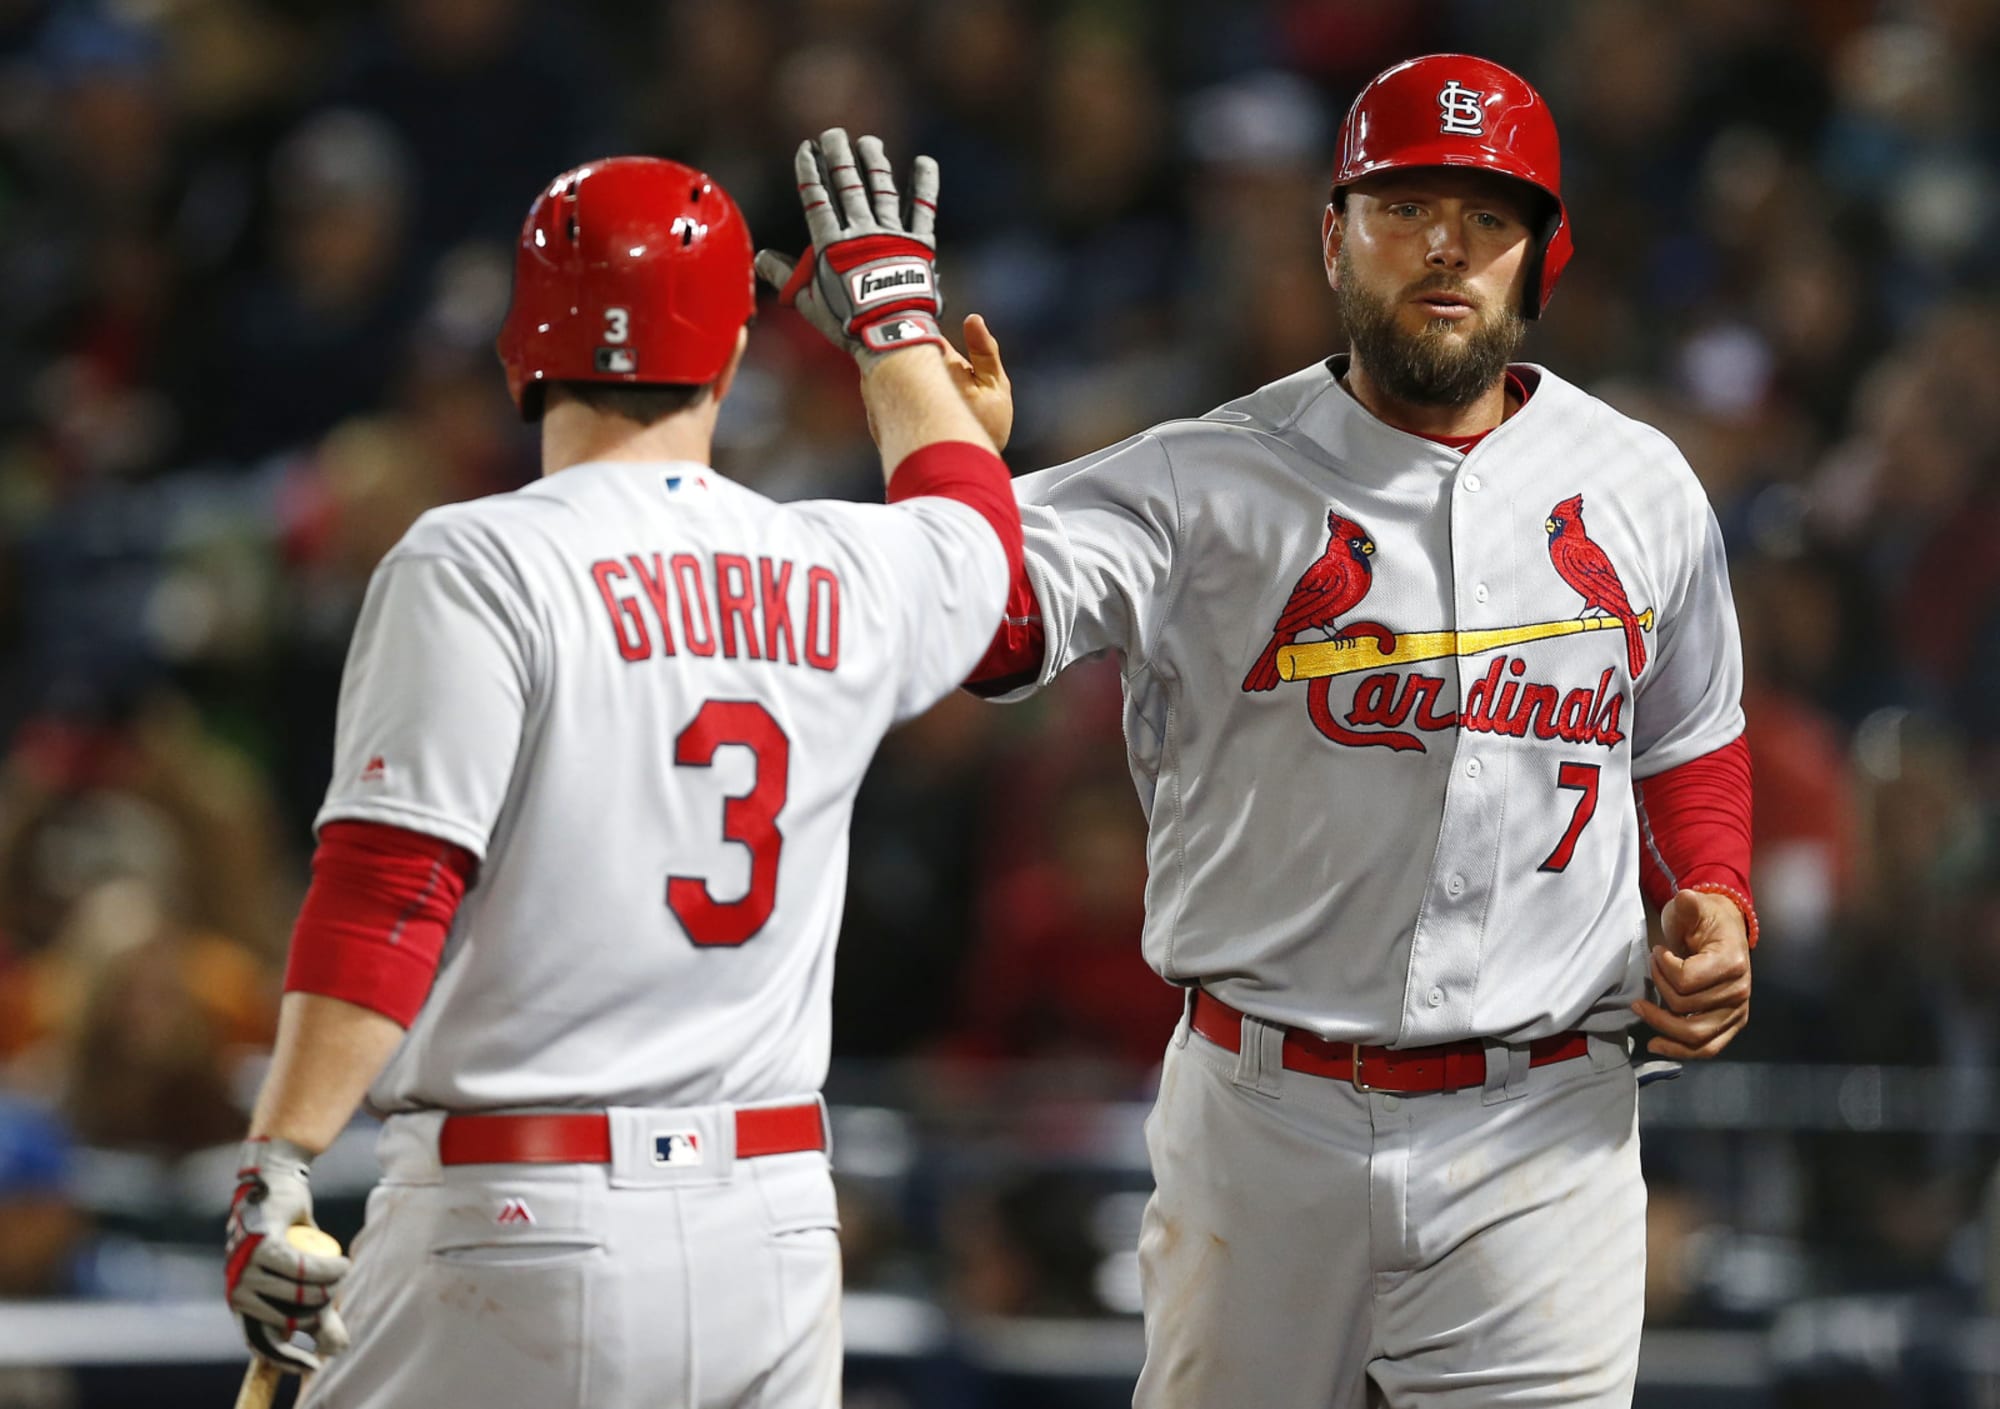 St. Louis Cardinals: Ranking the top Cardinal &quot;killers&quot; from the 21st century